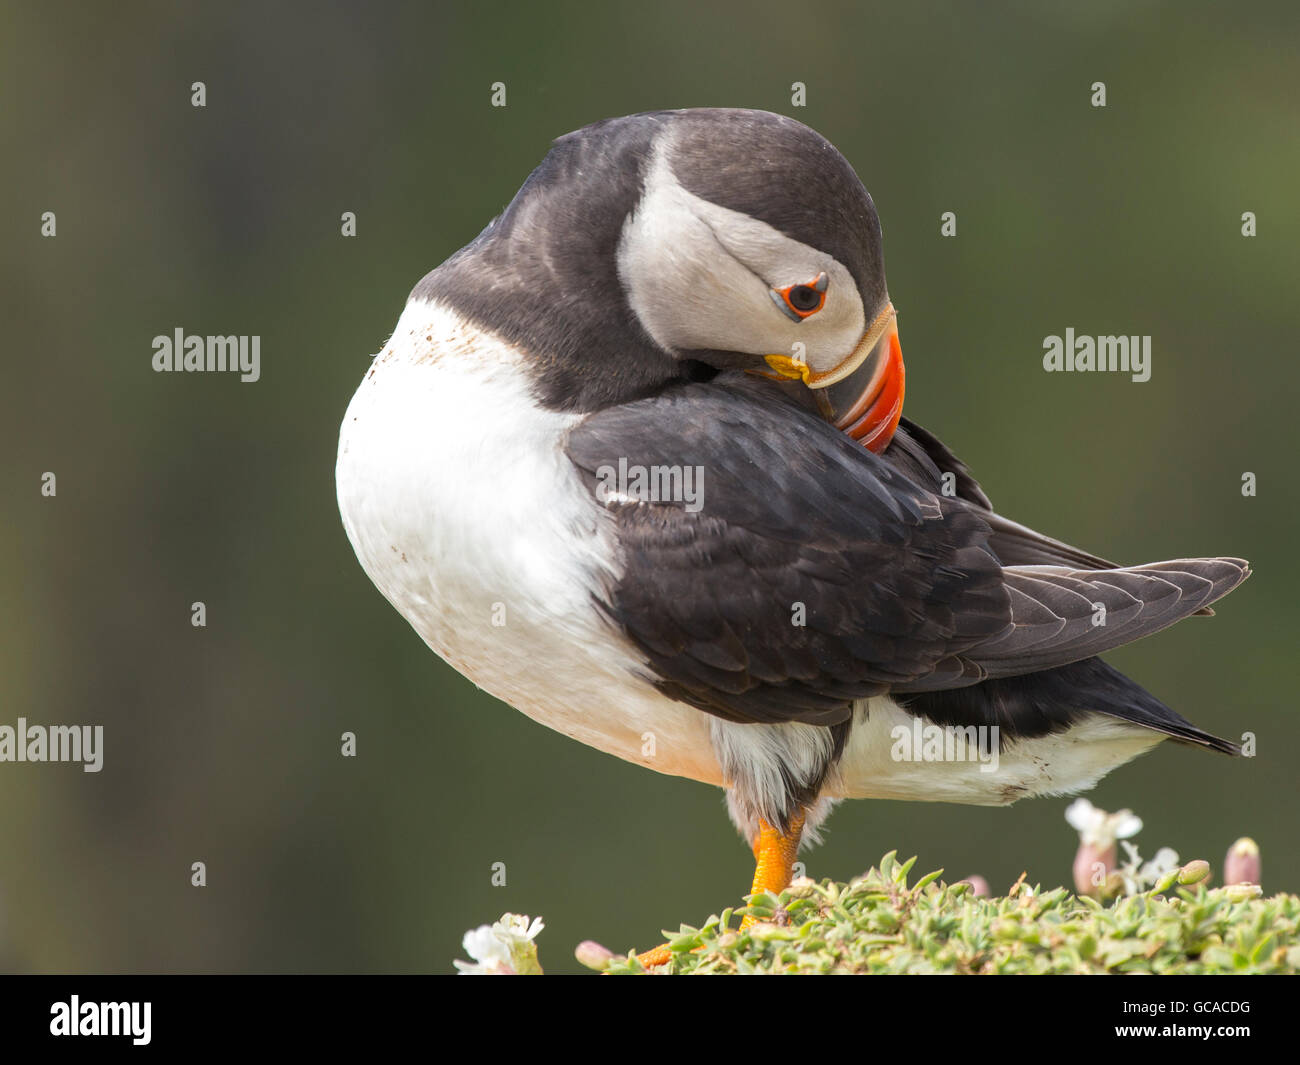 Puffin preening its feathers Stock Photo